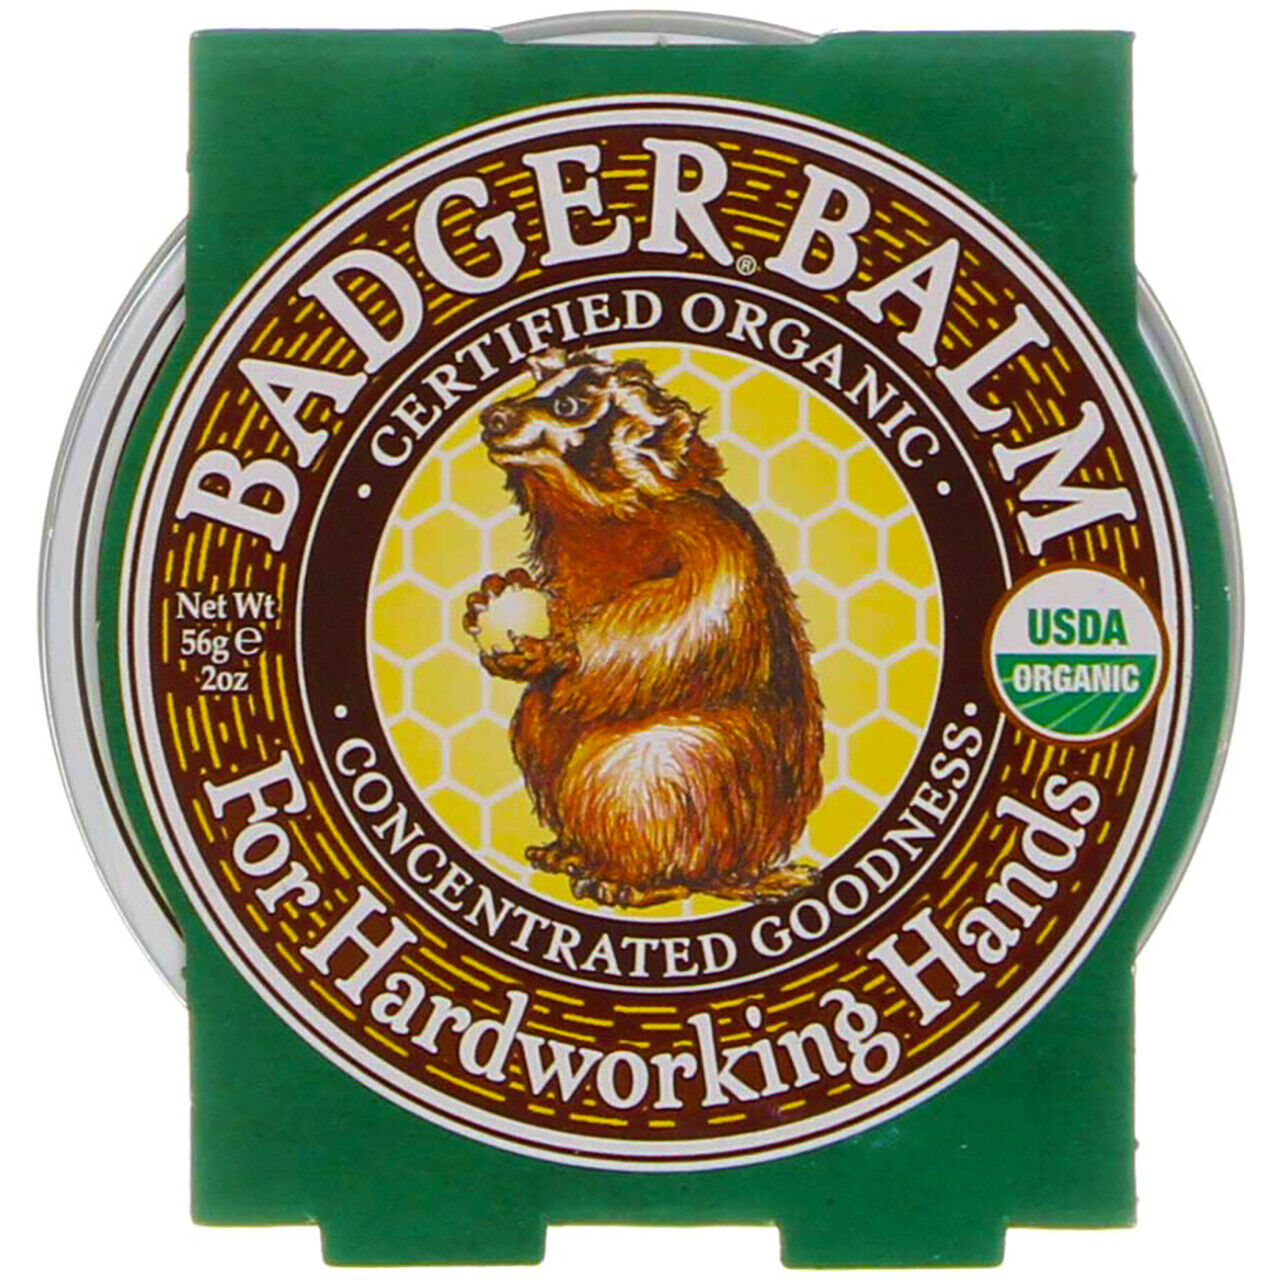 Badger For Hardworking Hands Oklahoma City Mall New arrival 2 Balm oz Tin